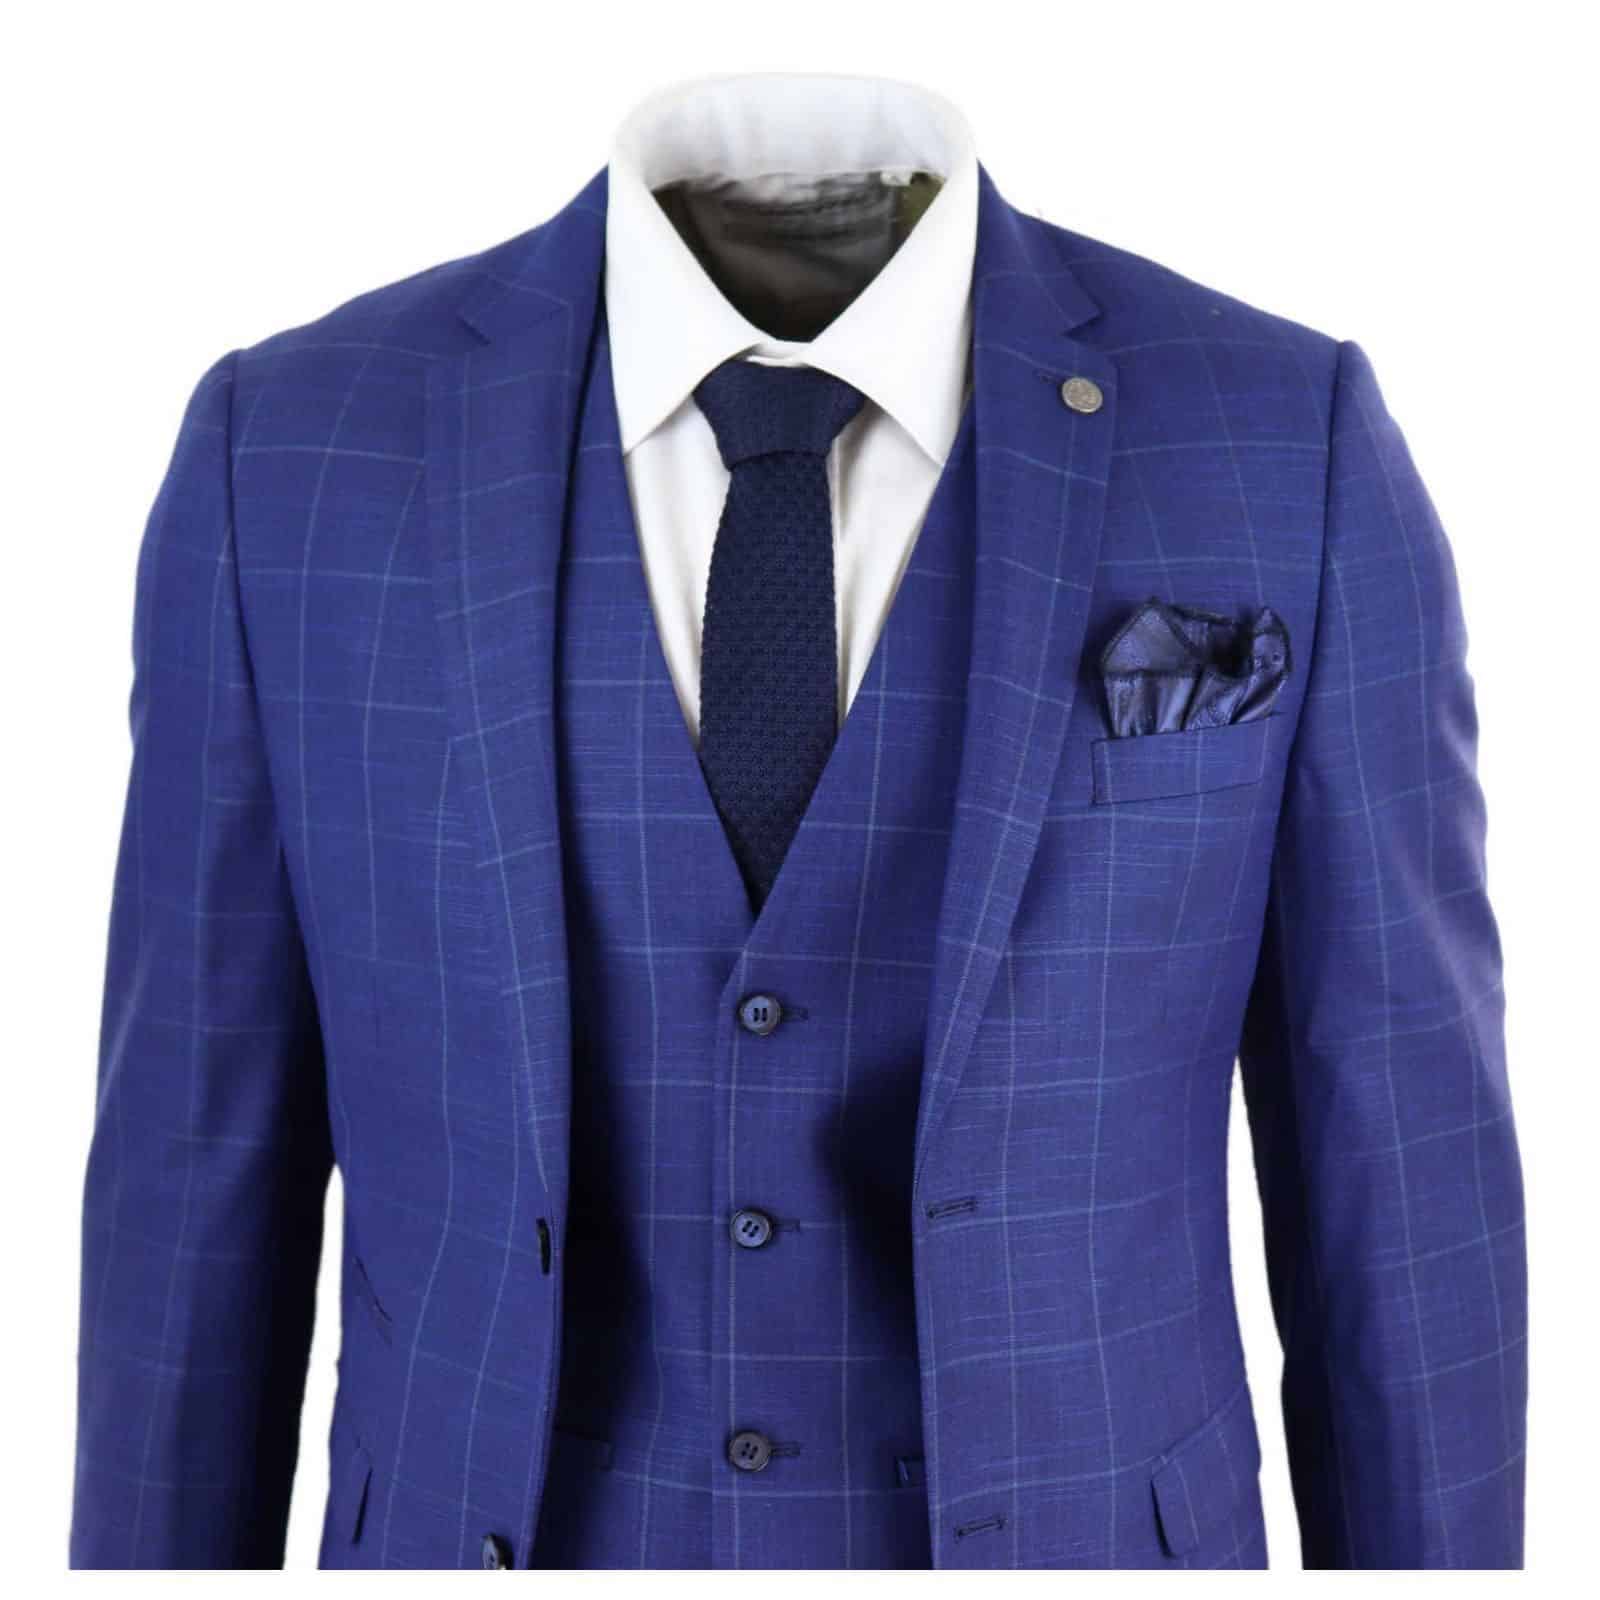 Mens Royal Blue 3 Piece Check Suit Paul Andrew Rover